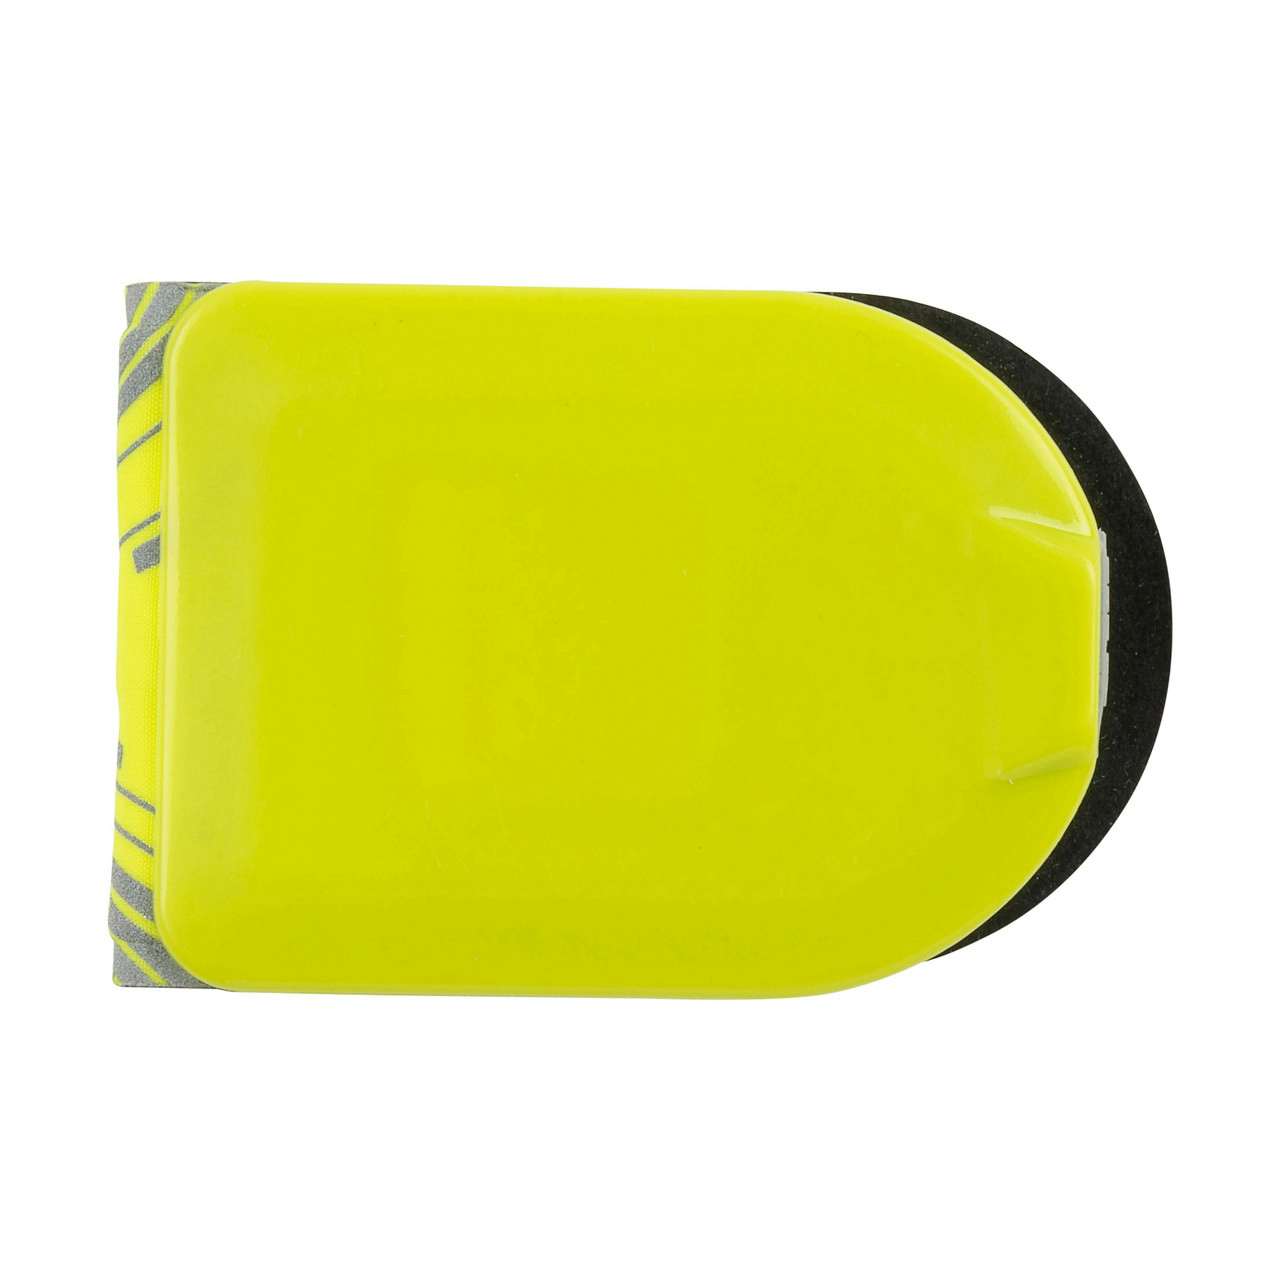 TagLit Rechargeable Magnetic LED Marker Neon Yellow